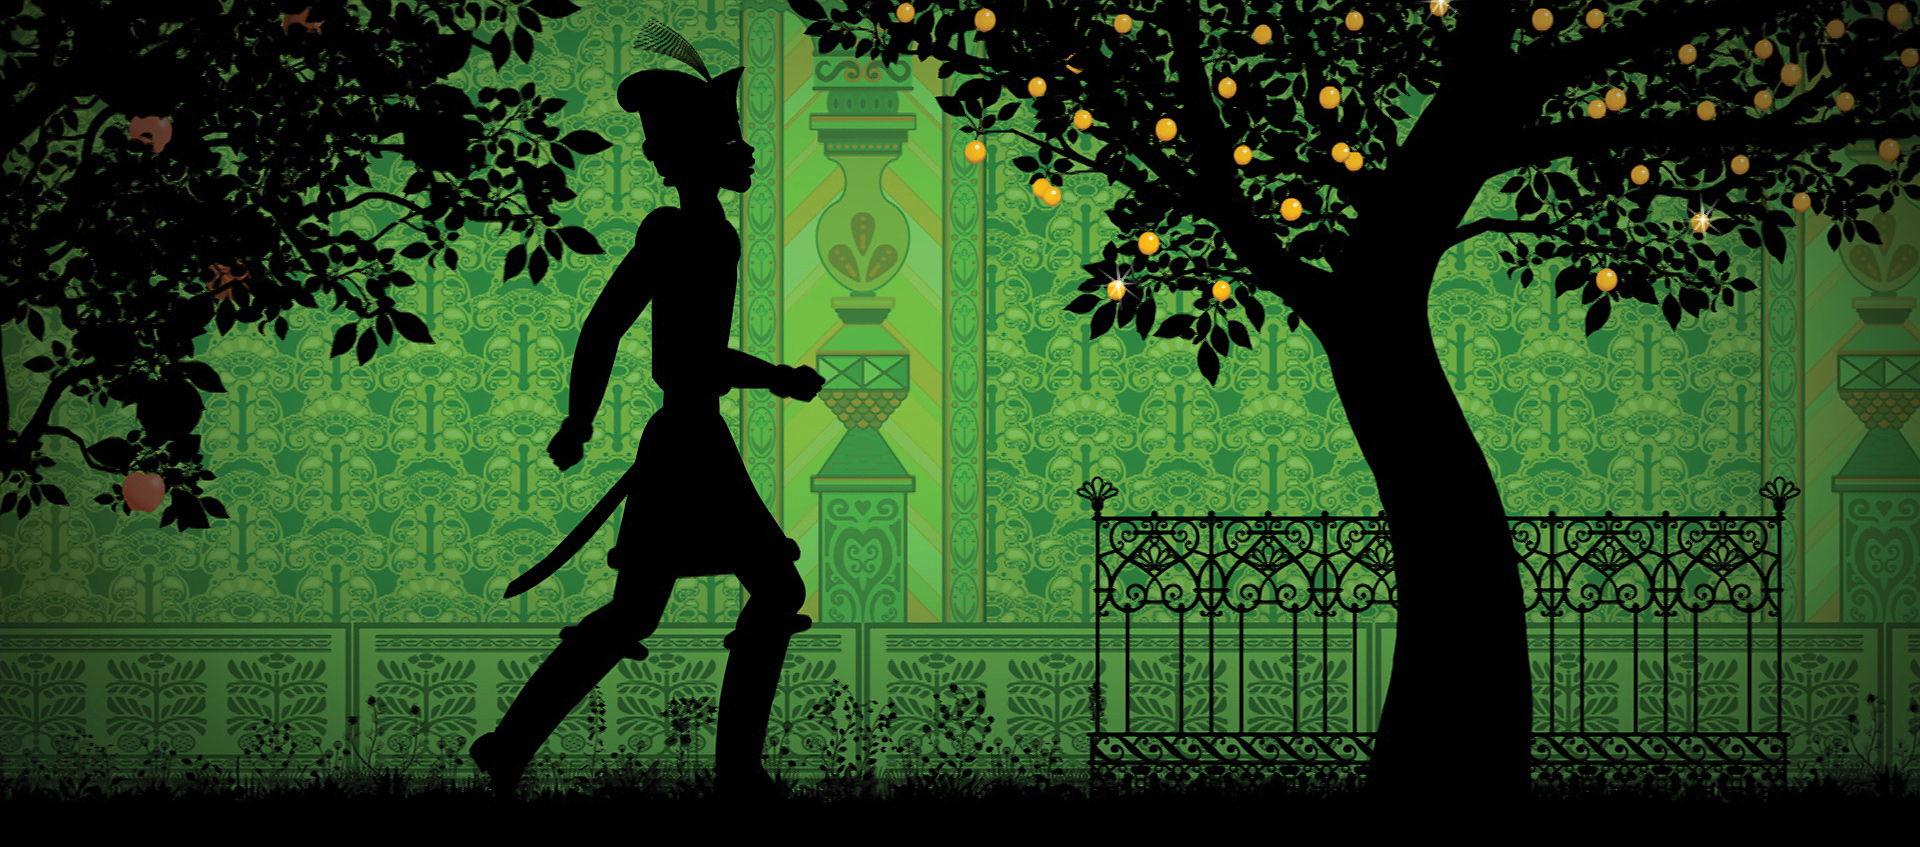 a cartoon of a boy walking past trees with yellow fruits